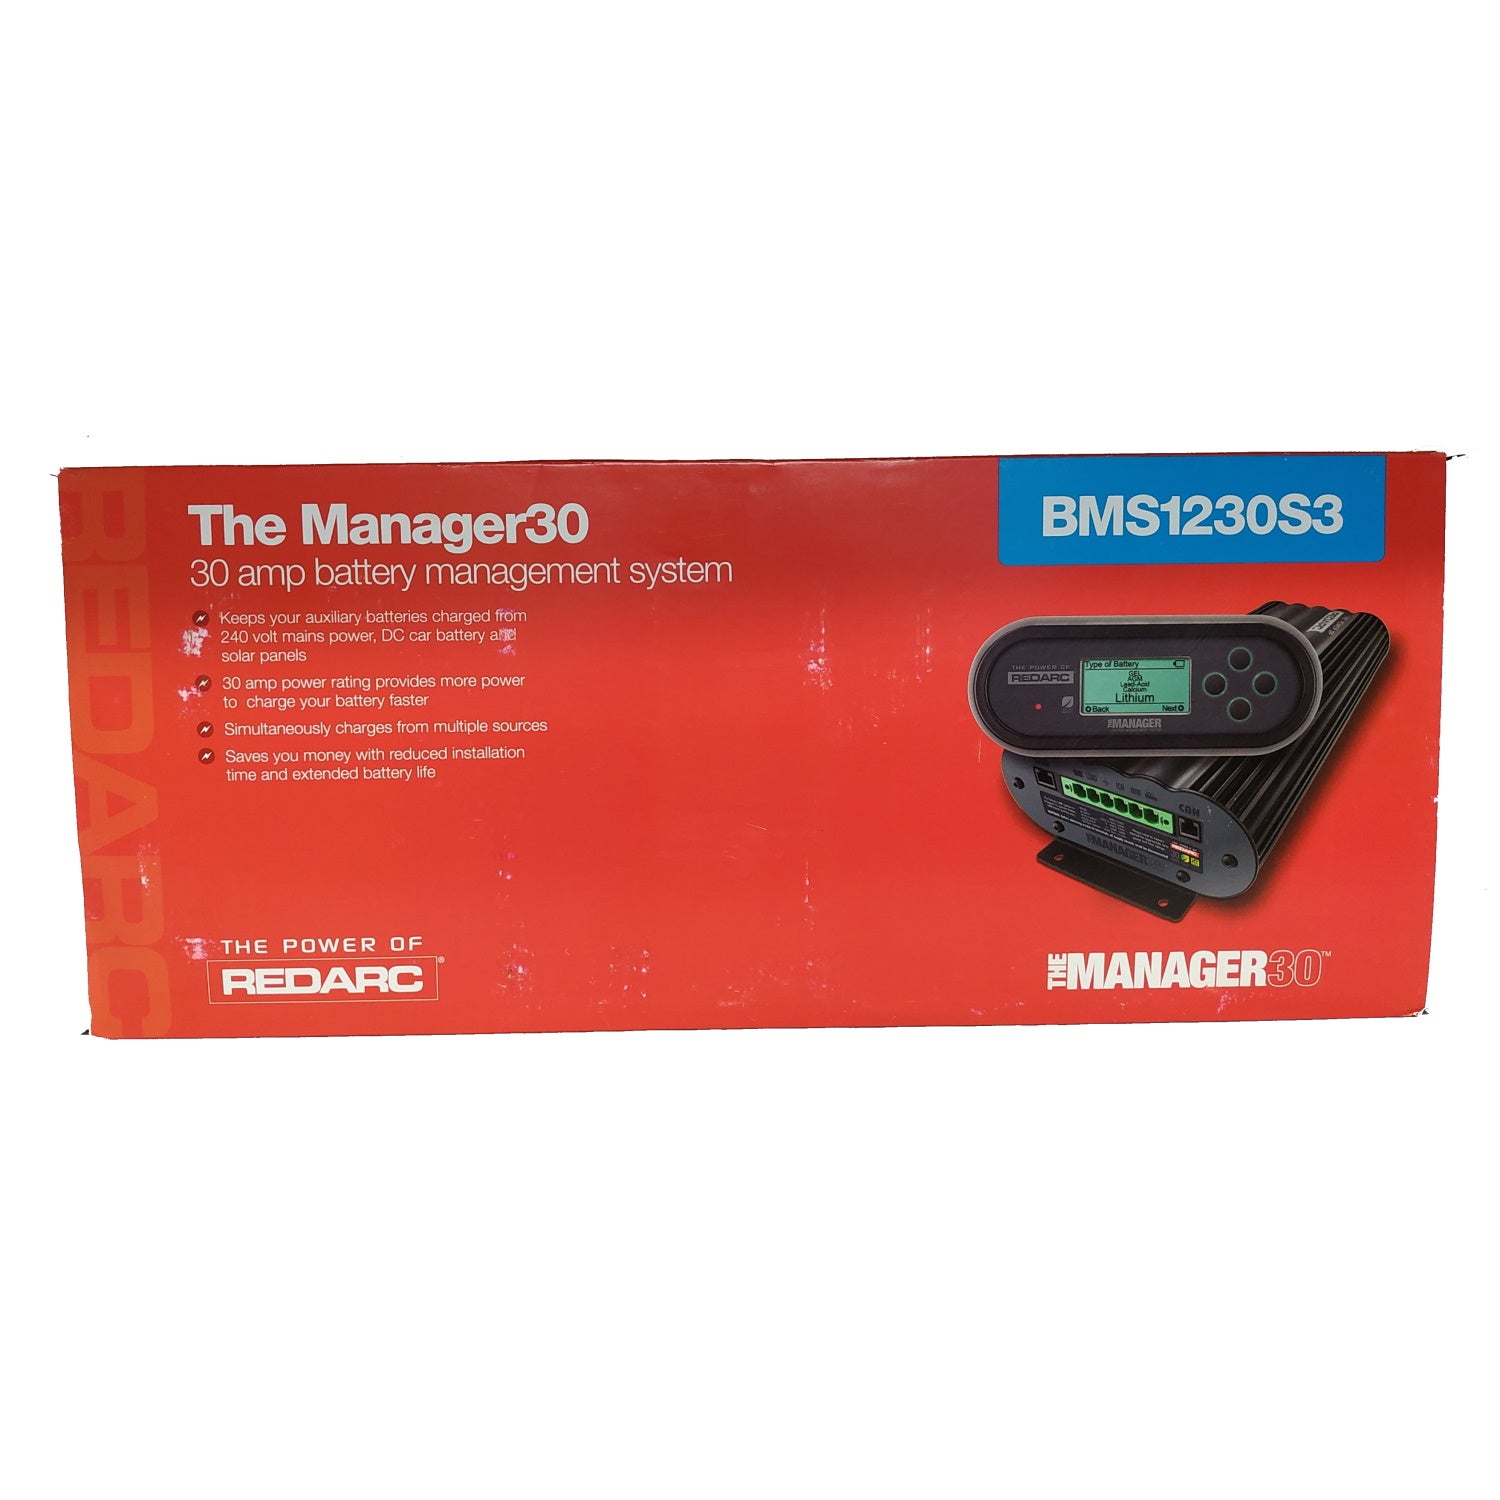 BMS1230S3 | Redarc Battery Management System 30Amp The Manager30 DC Chargers/Managers | original packaging | Perth Pro Auto Electric Parts